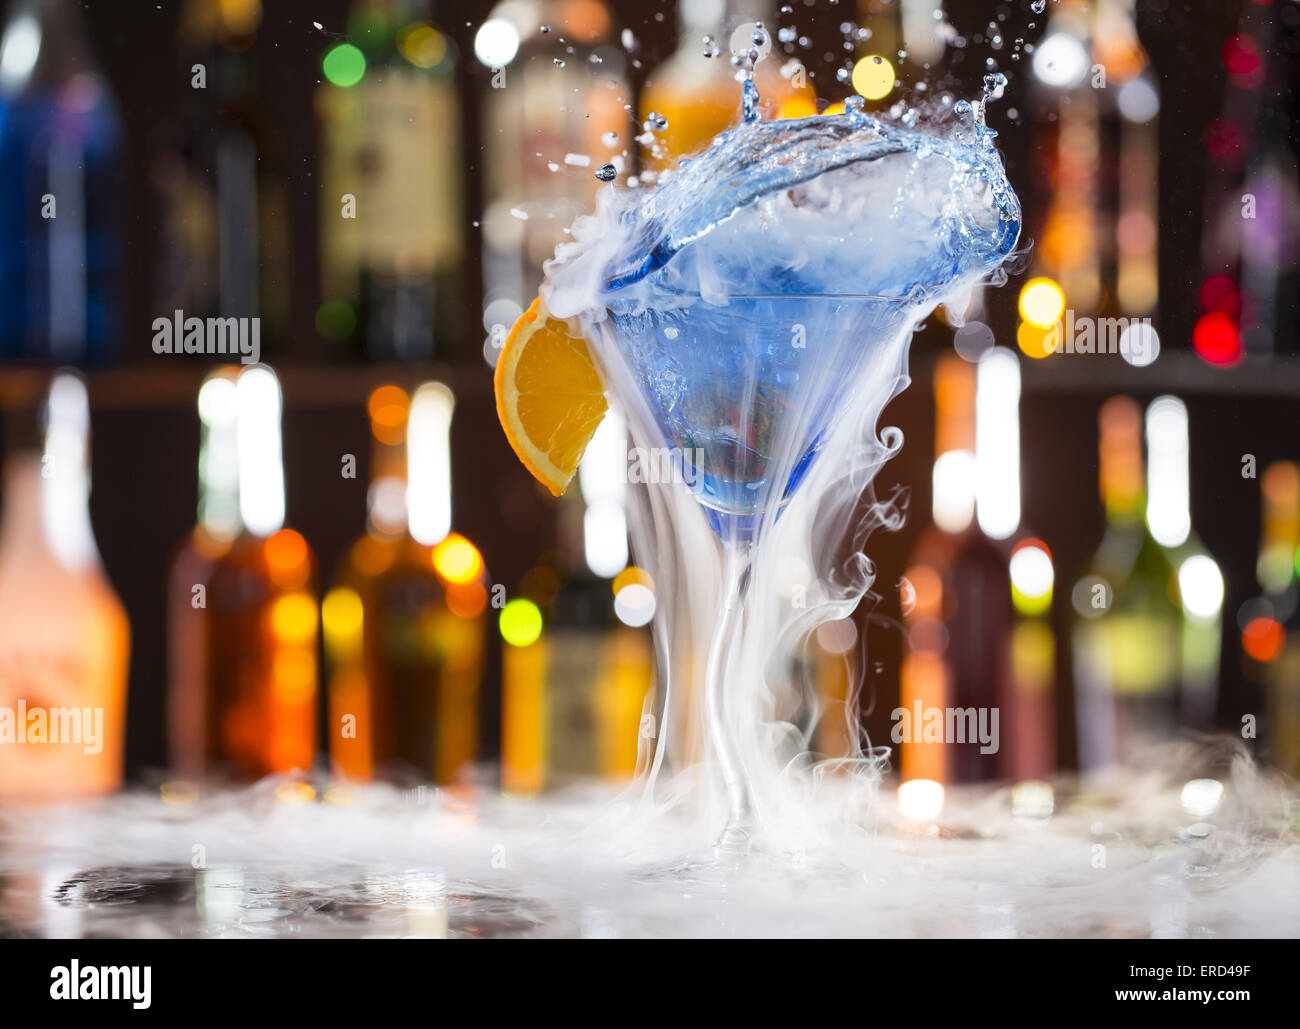 Cocktail with ice vapor on bar desk, close-up. Stock Photo